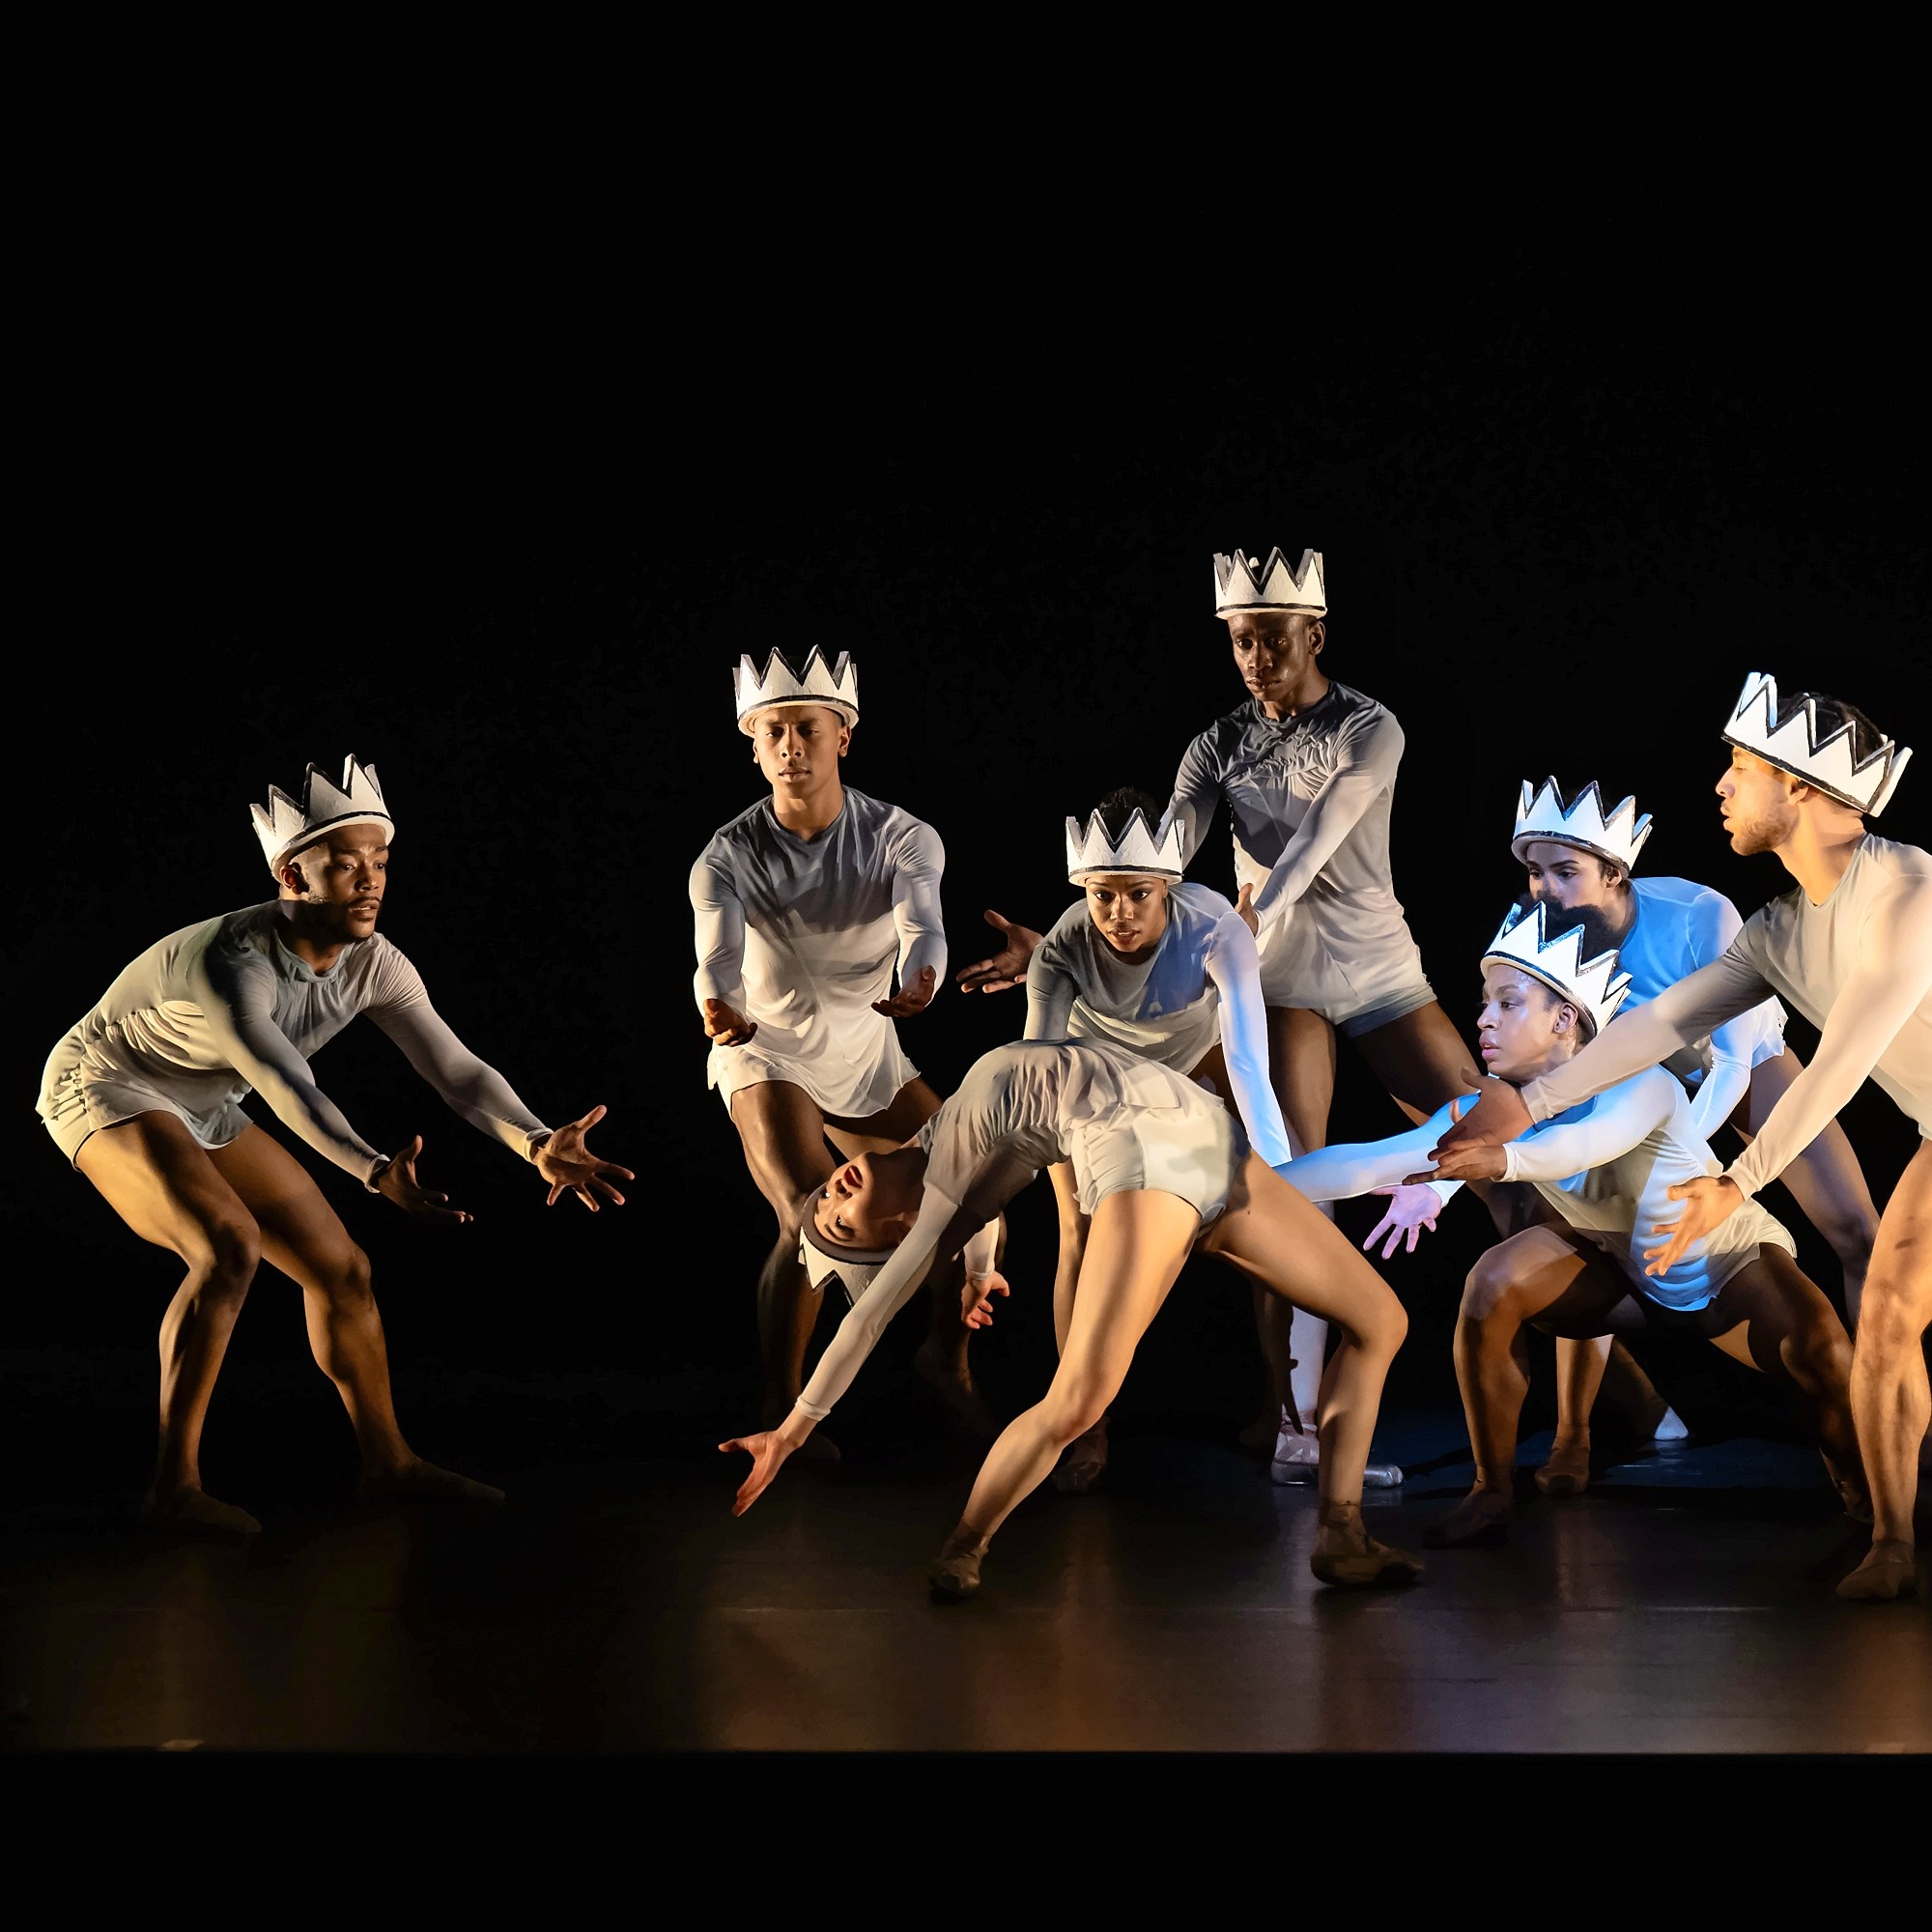 Ballet Black performing If at First, choreographed by Sophie Laplane